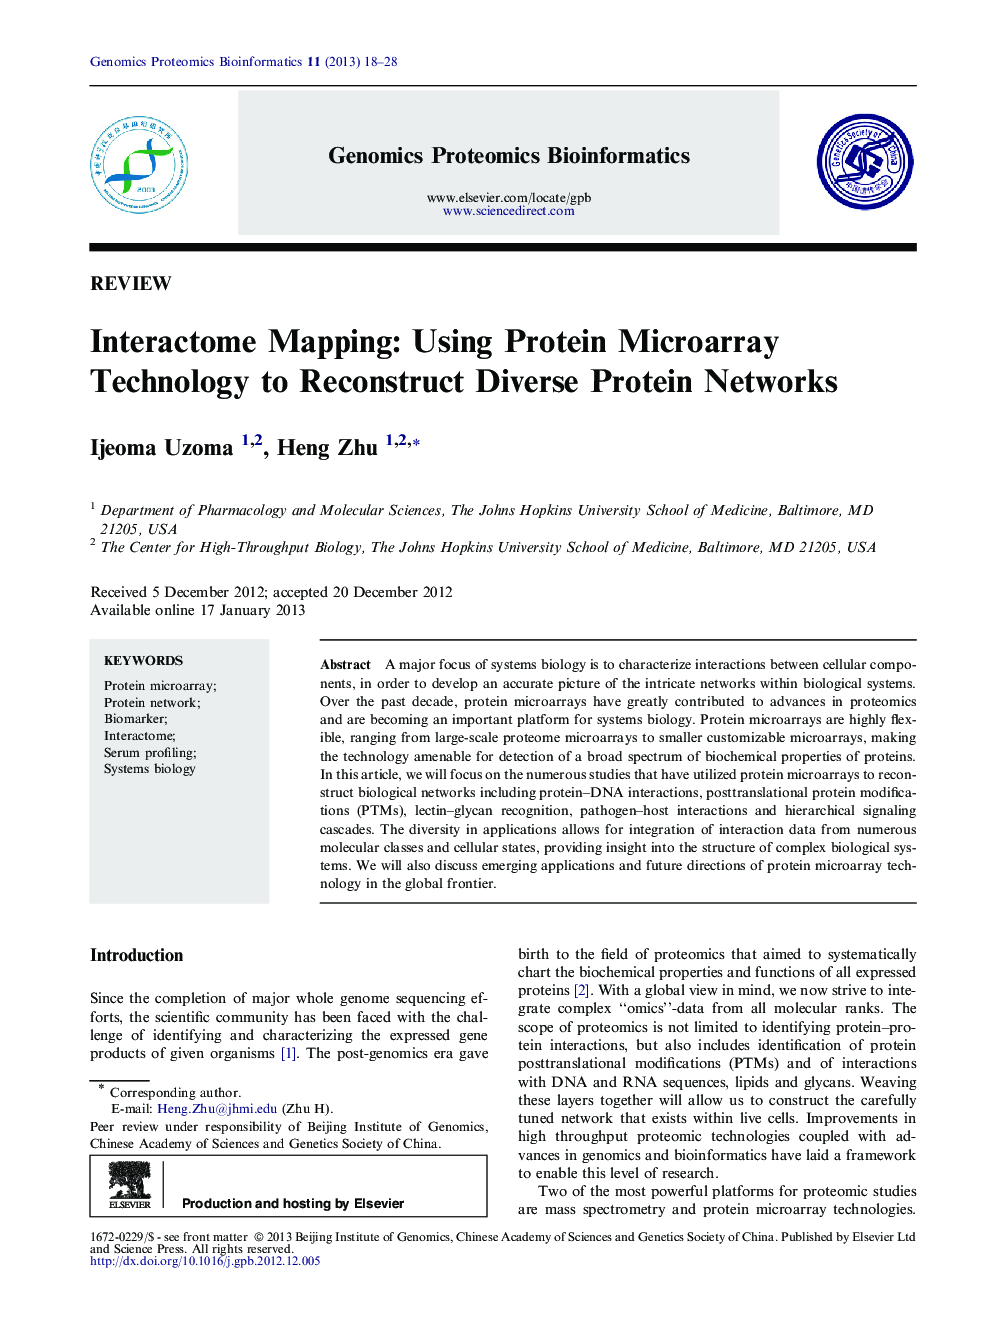 Interactome Mapping: Using Protein Microarray Technology to Reconstruct Diverse Protein Networks 